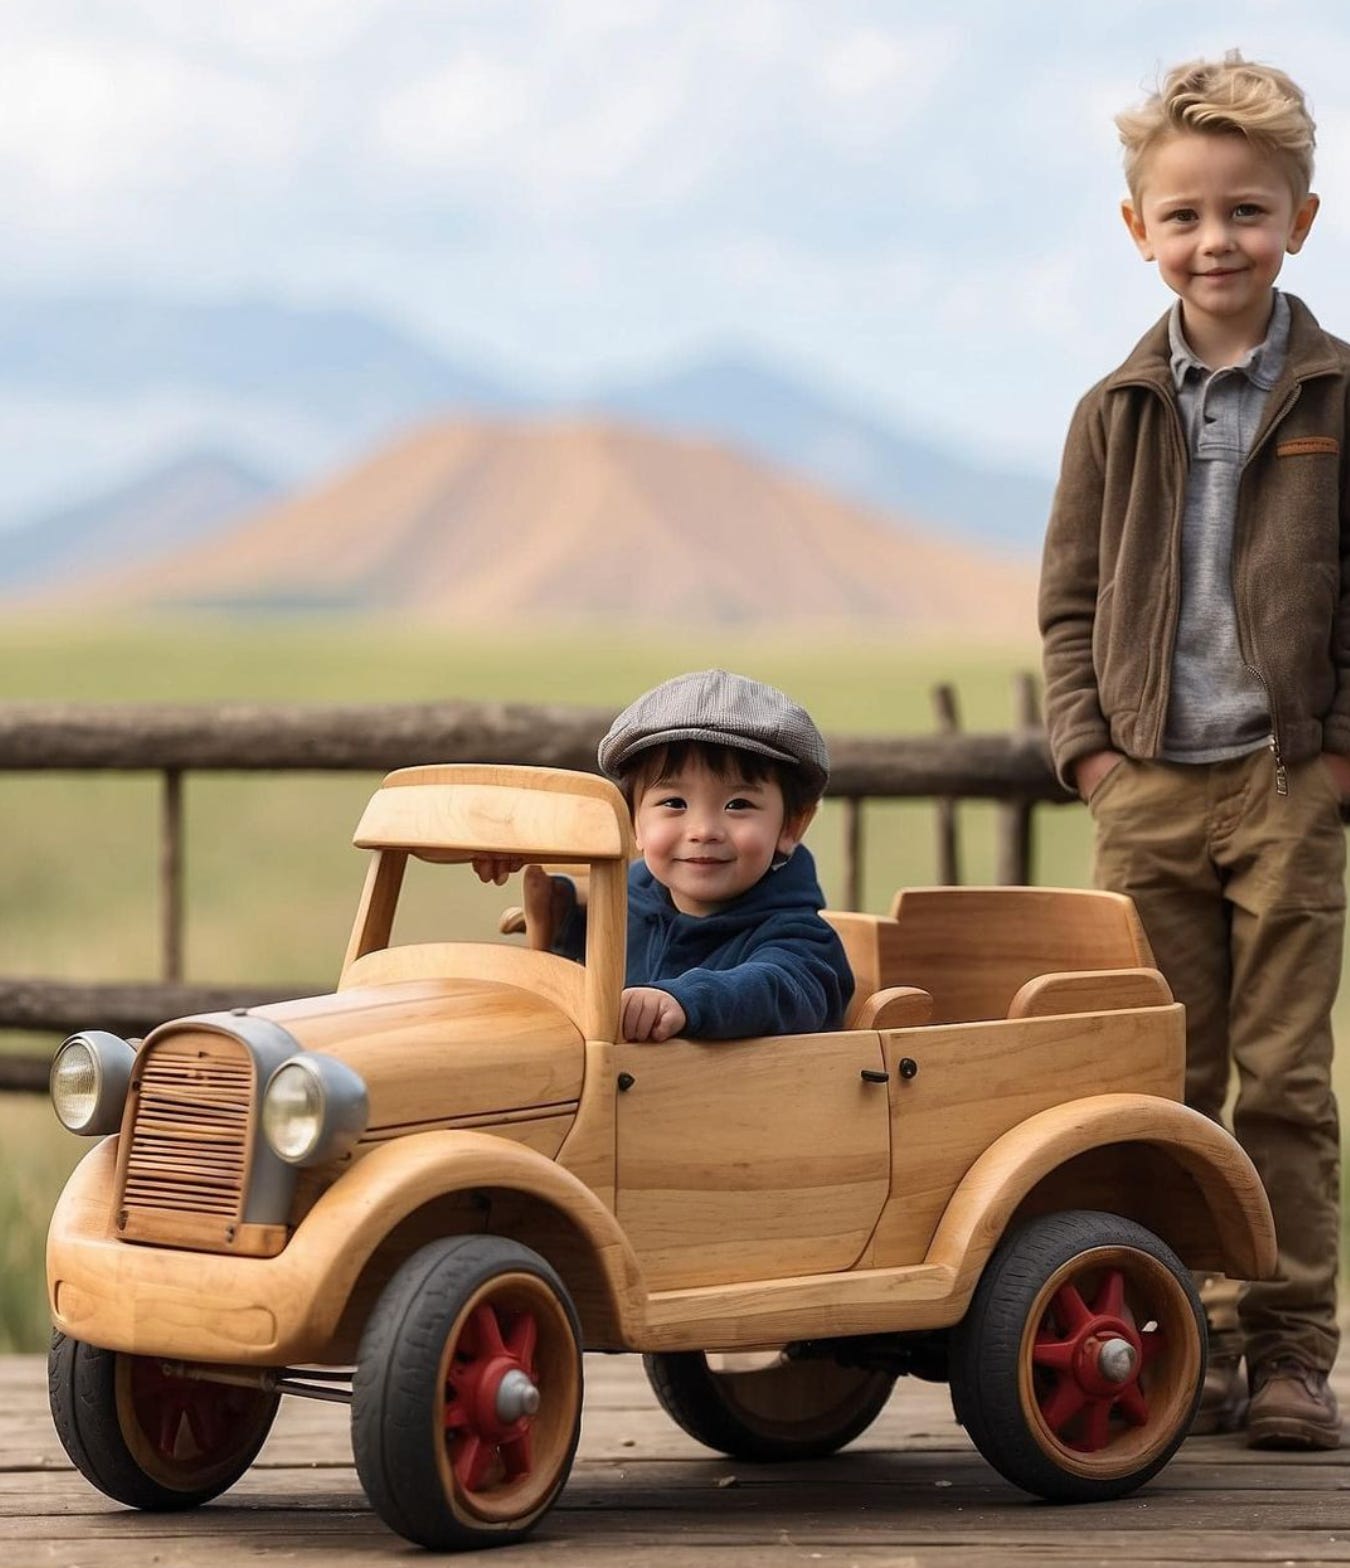 Two kids of different ethnicities smiling at camera, one in a wooden car